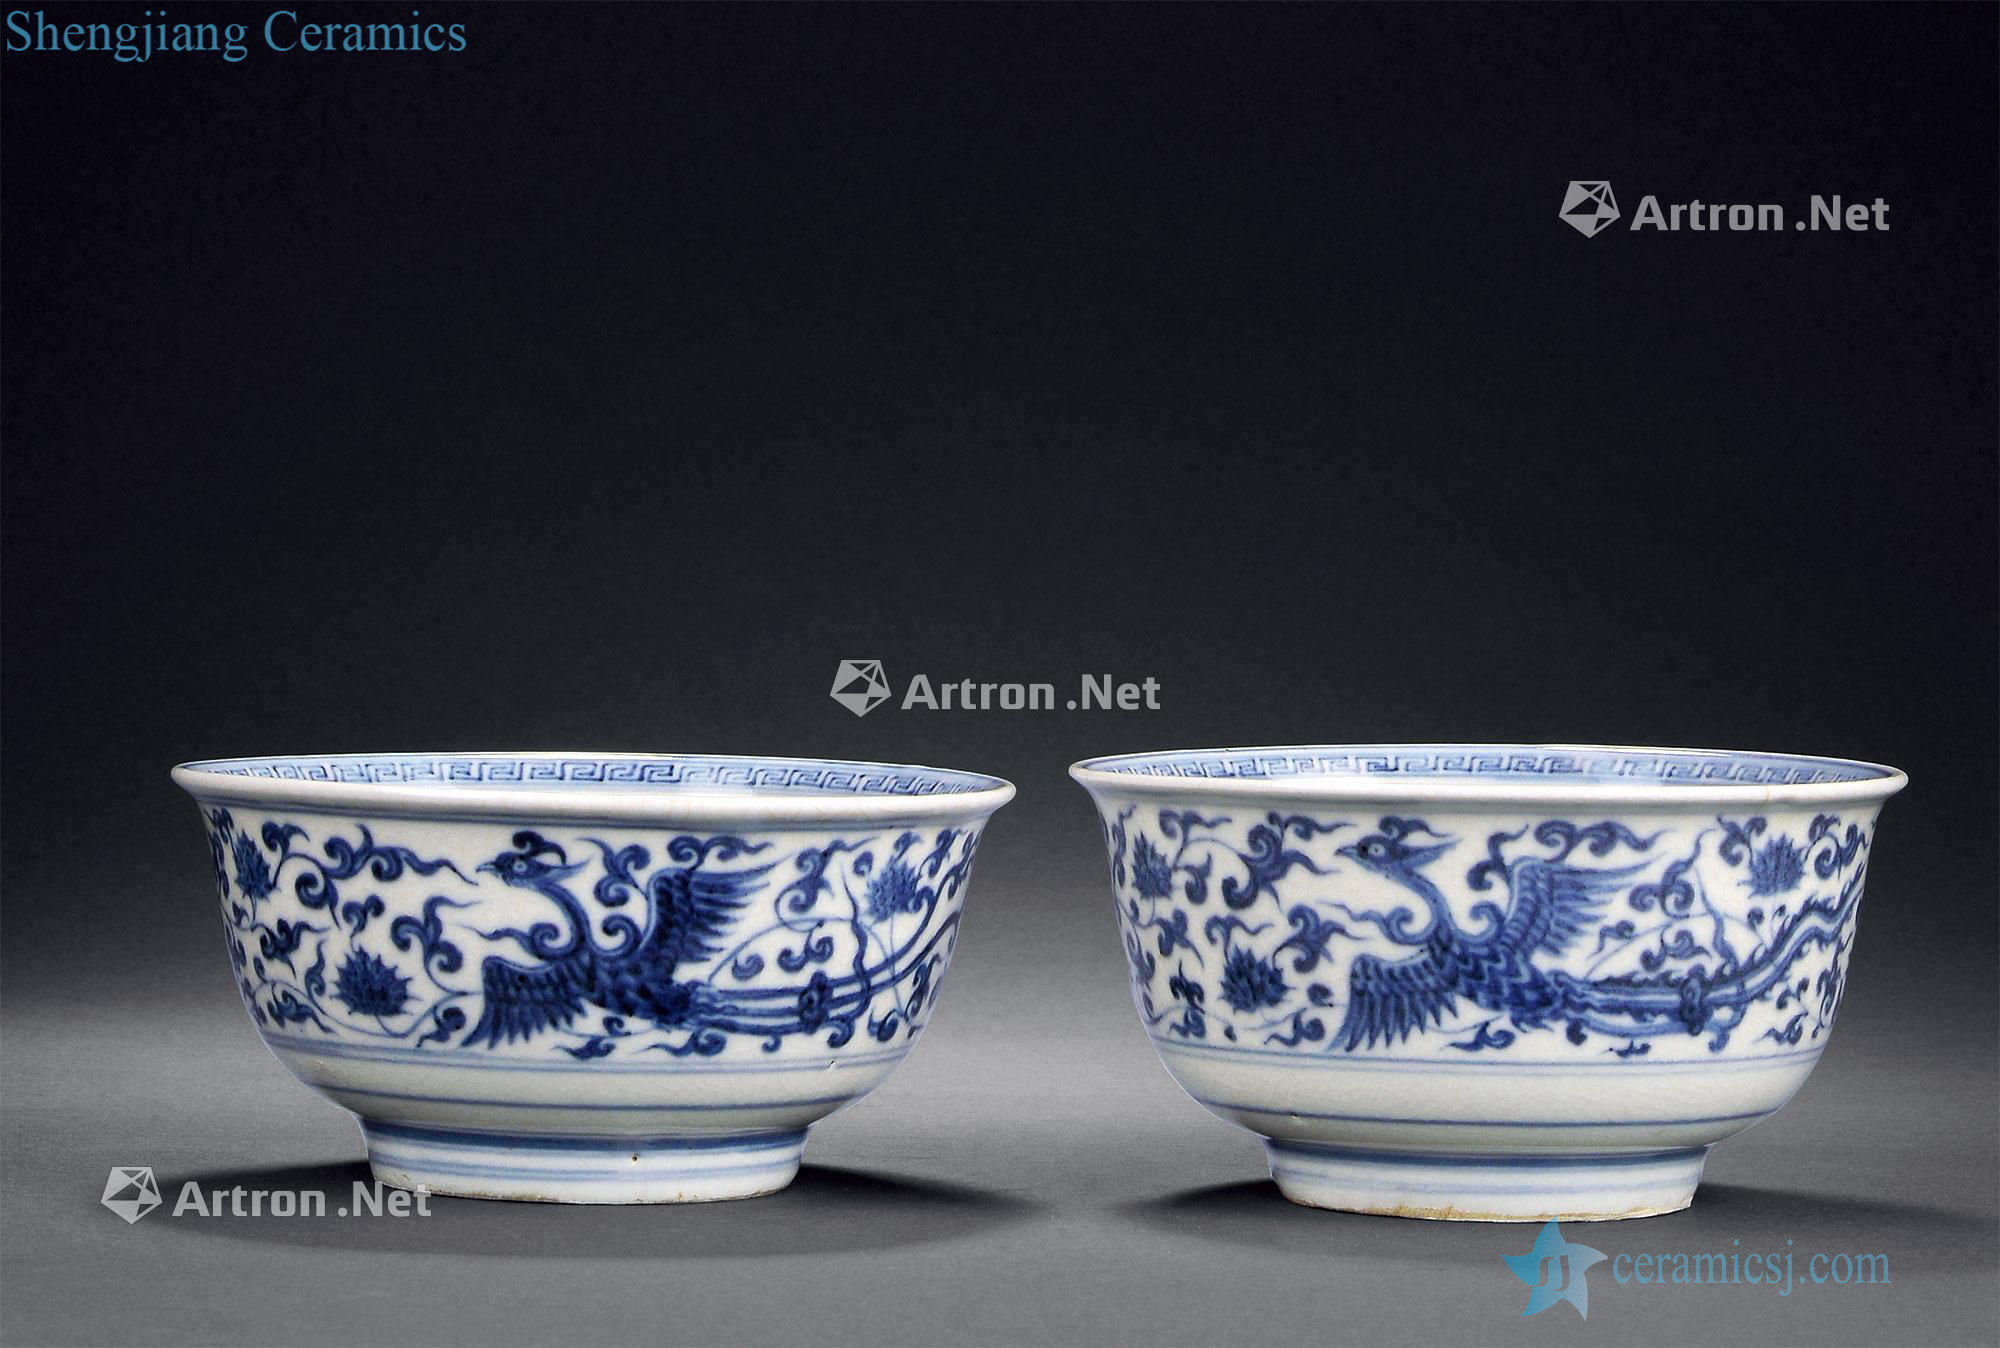 Ming blank period Blue and white chicken wear pattern bowl (a)